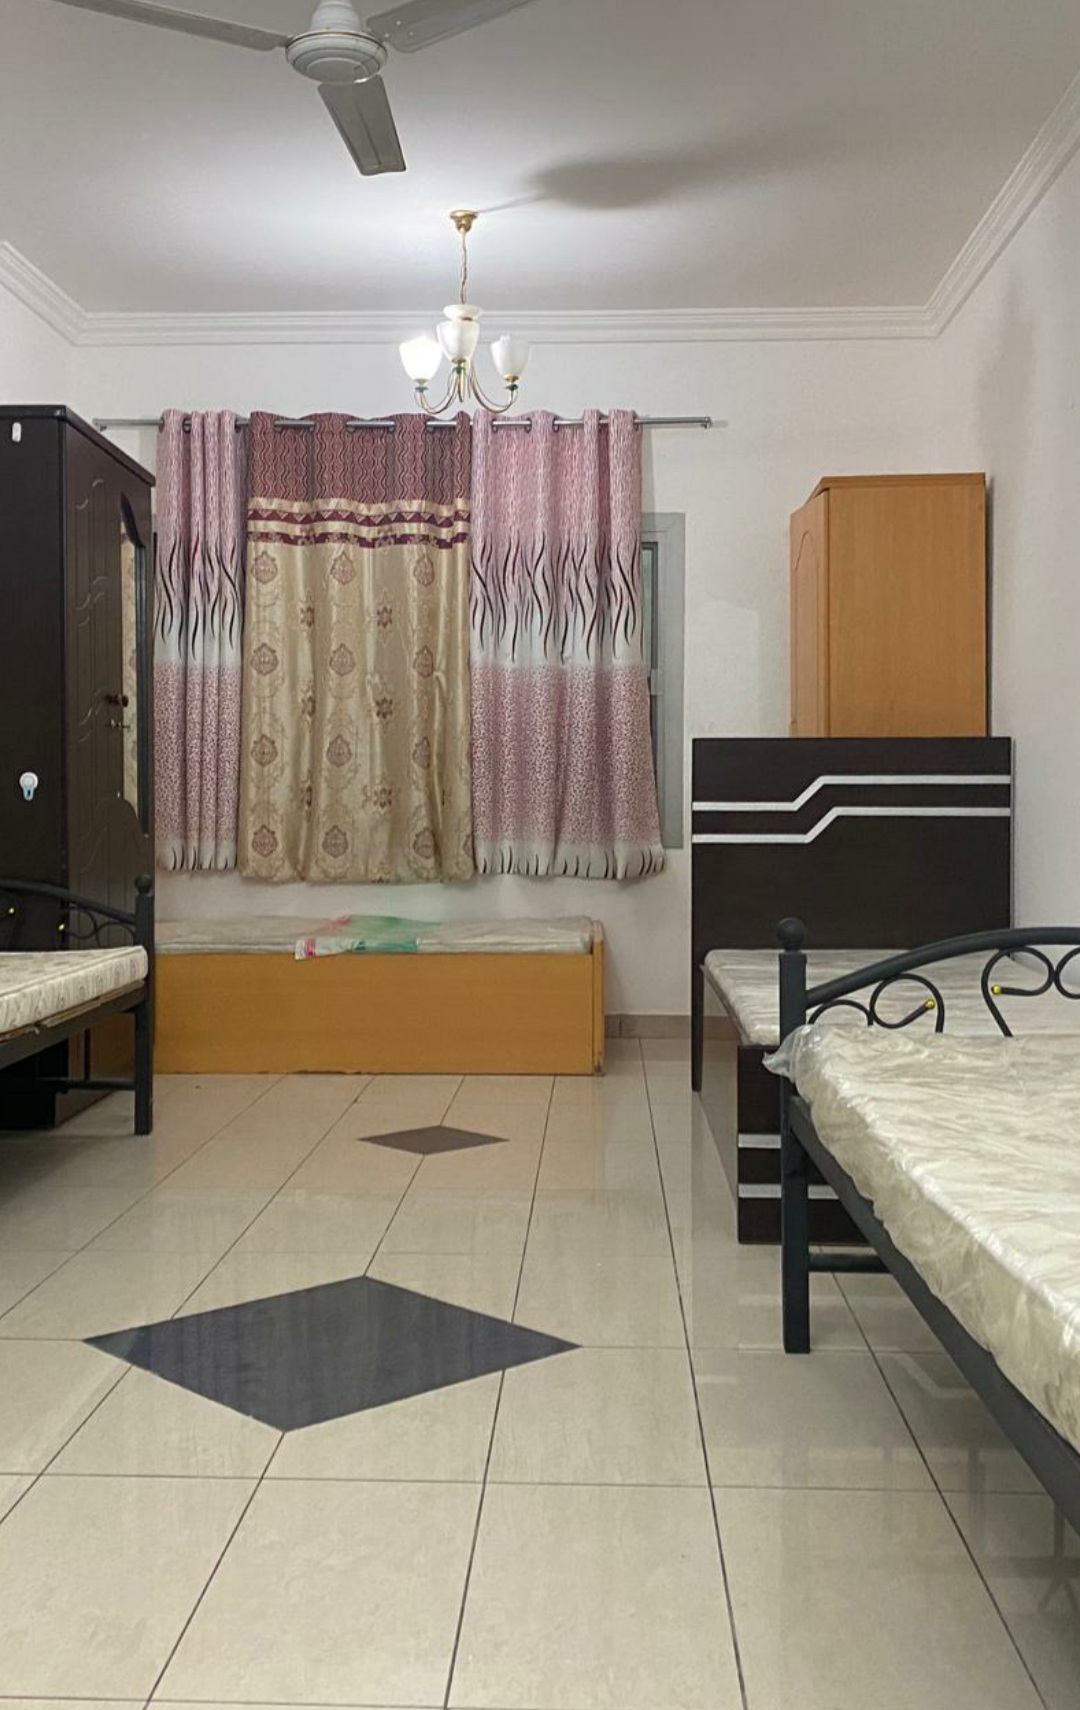 Karama Prime Location Fully Furnished Separate Bath Suitable For 4 Bachelors